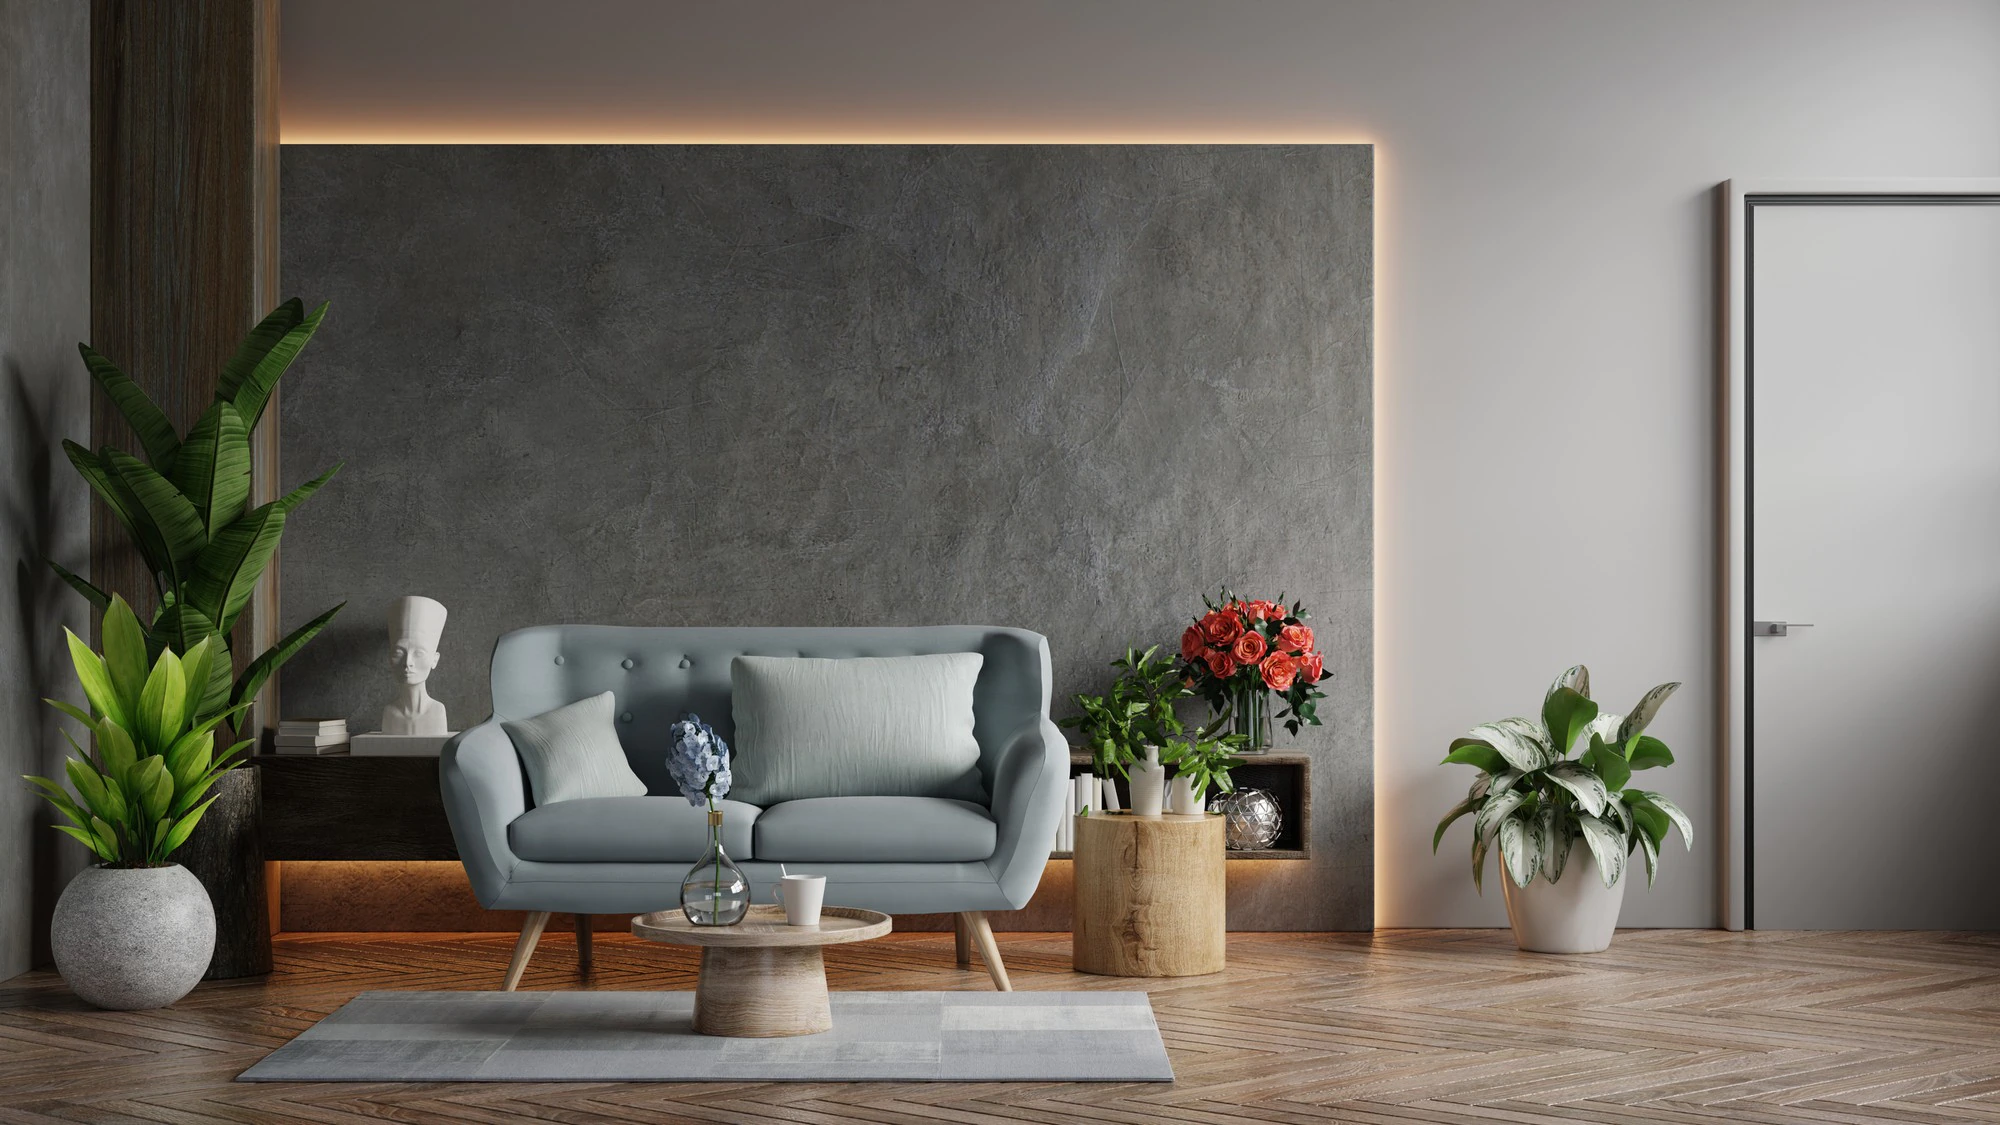 living room loft industrial style with blue sofa empty concrete wall 3d rendering 41470 3581